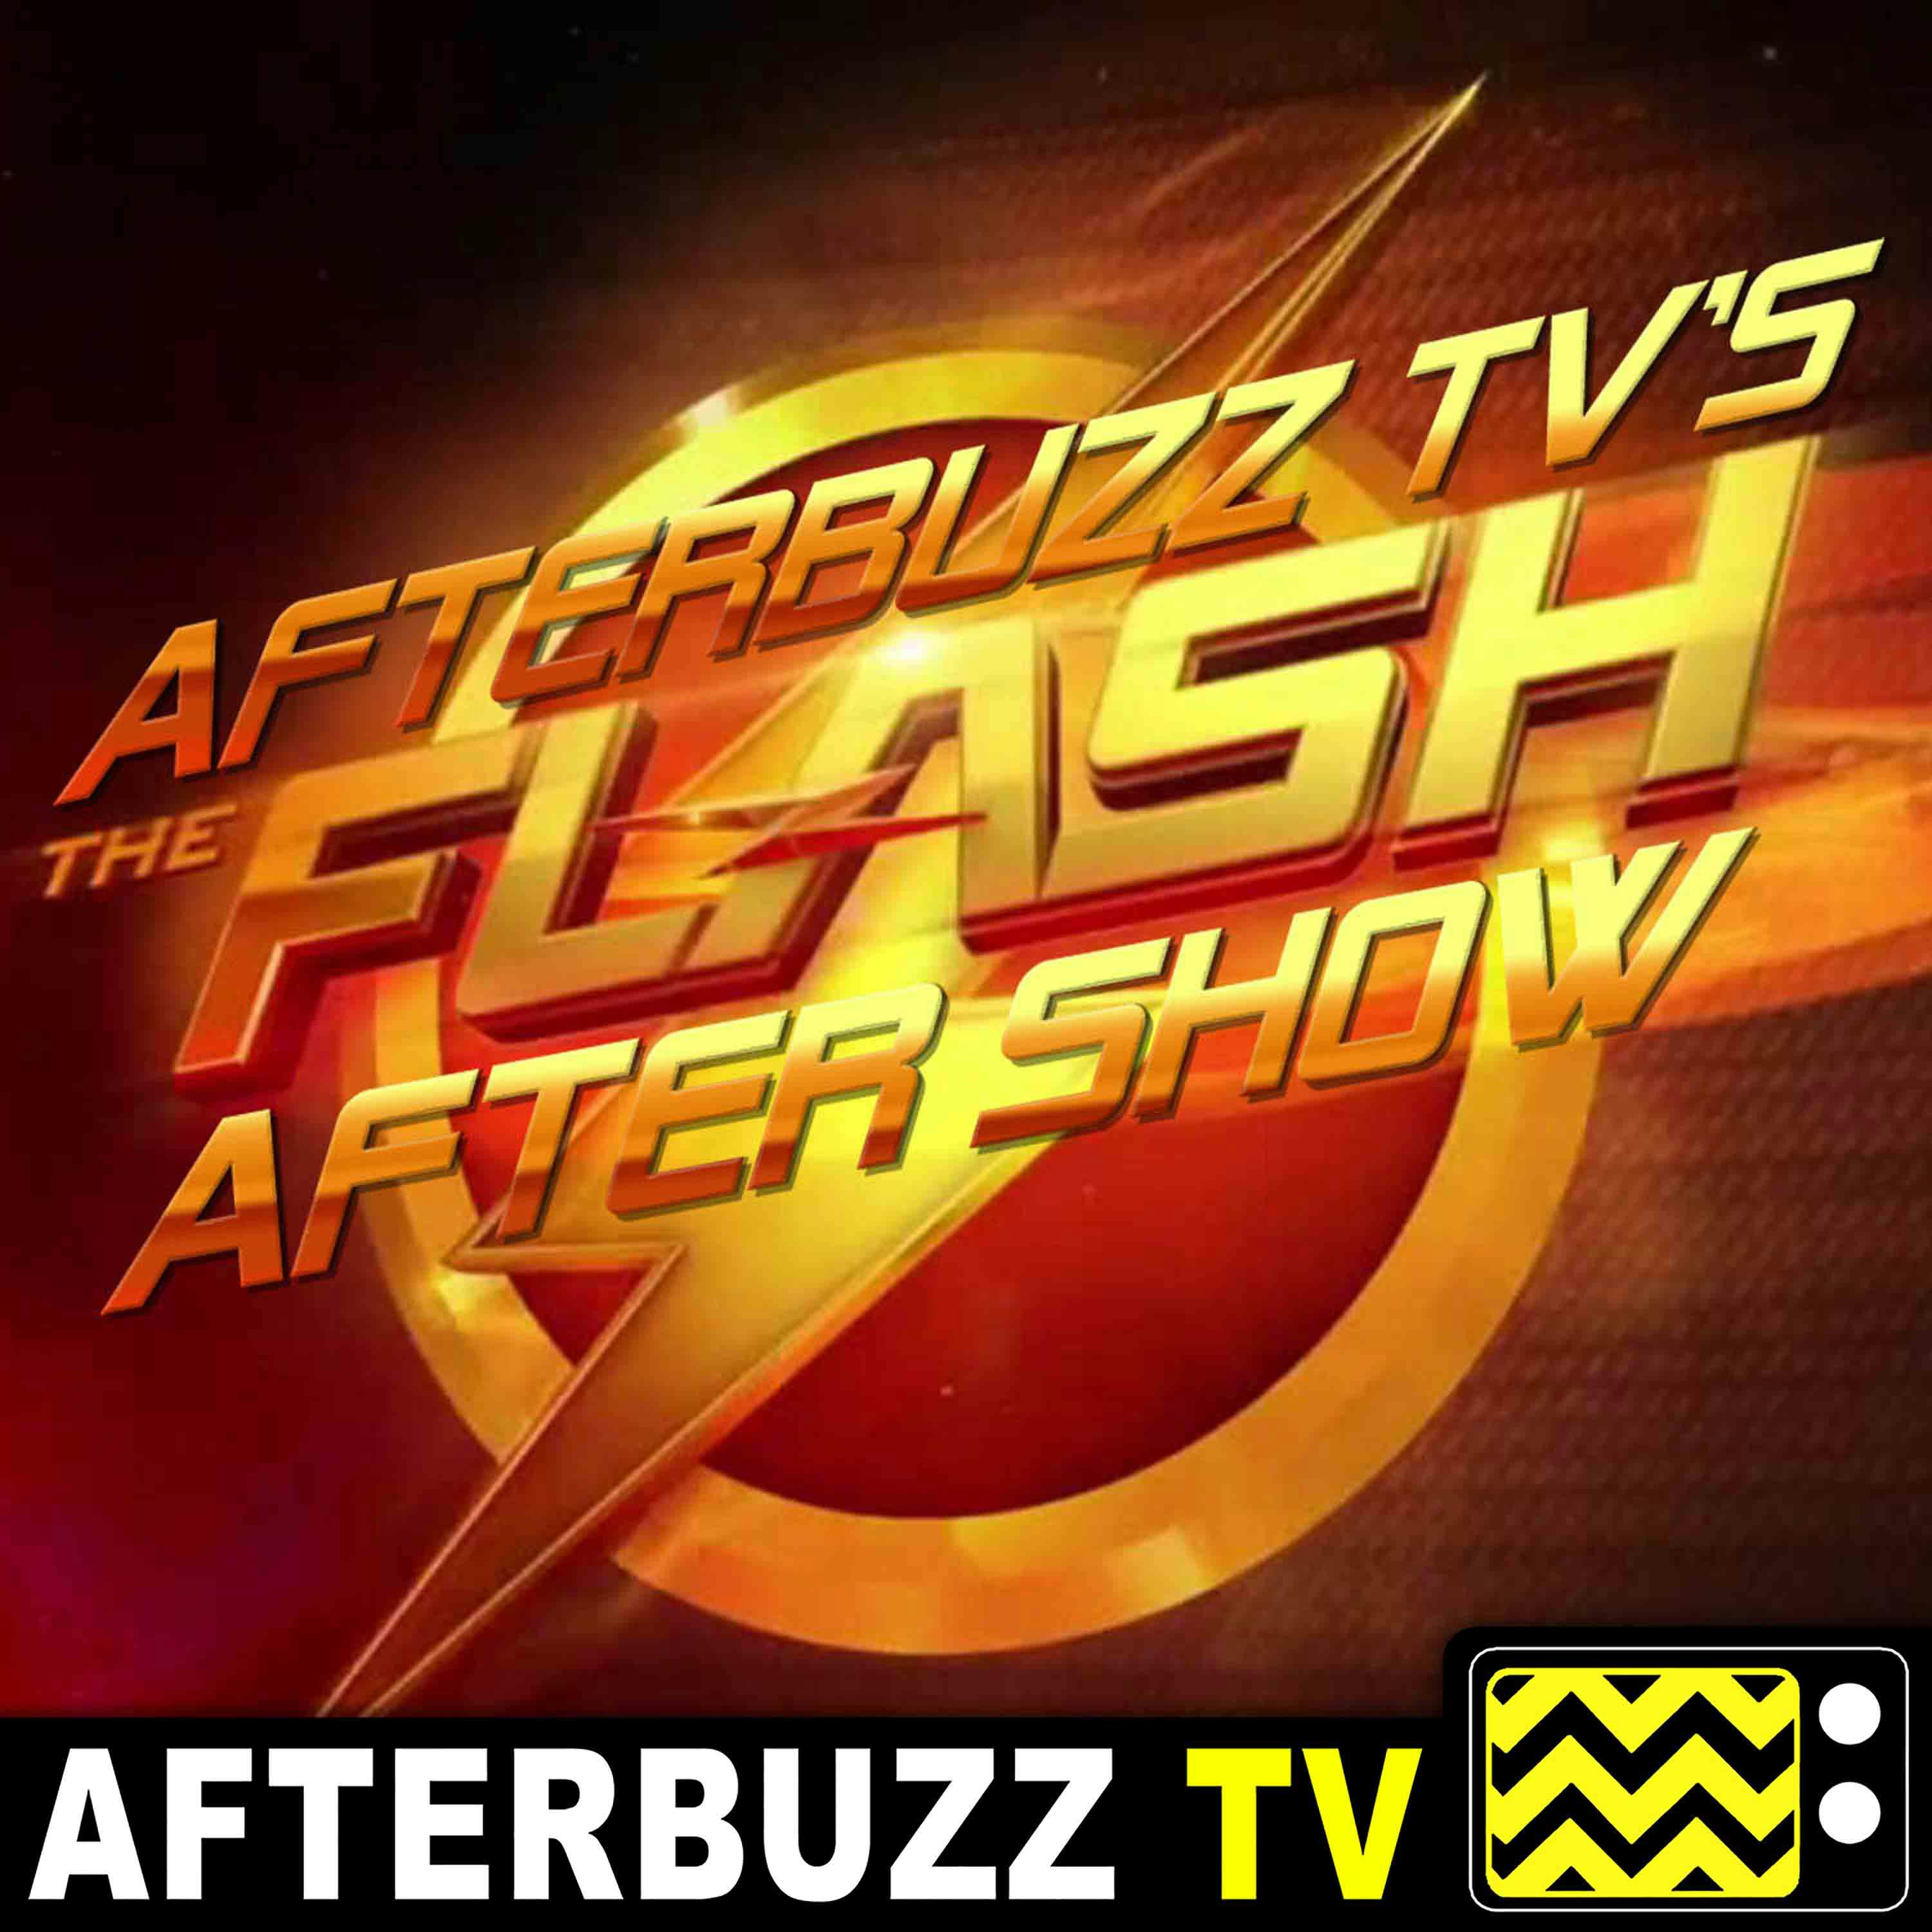 "A Flash of the Lightning" Season 6 Episode 2 'The Flash' Review